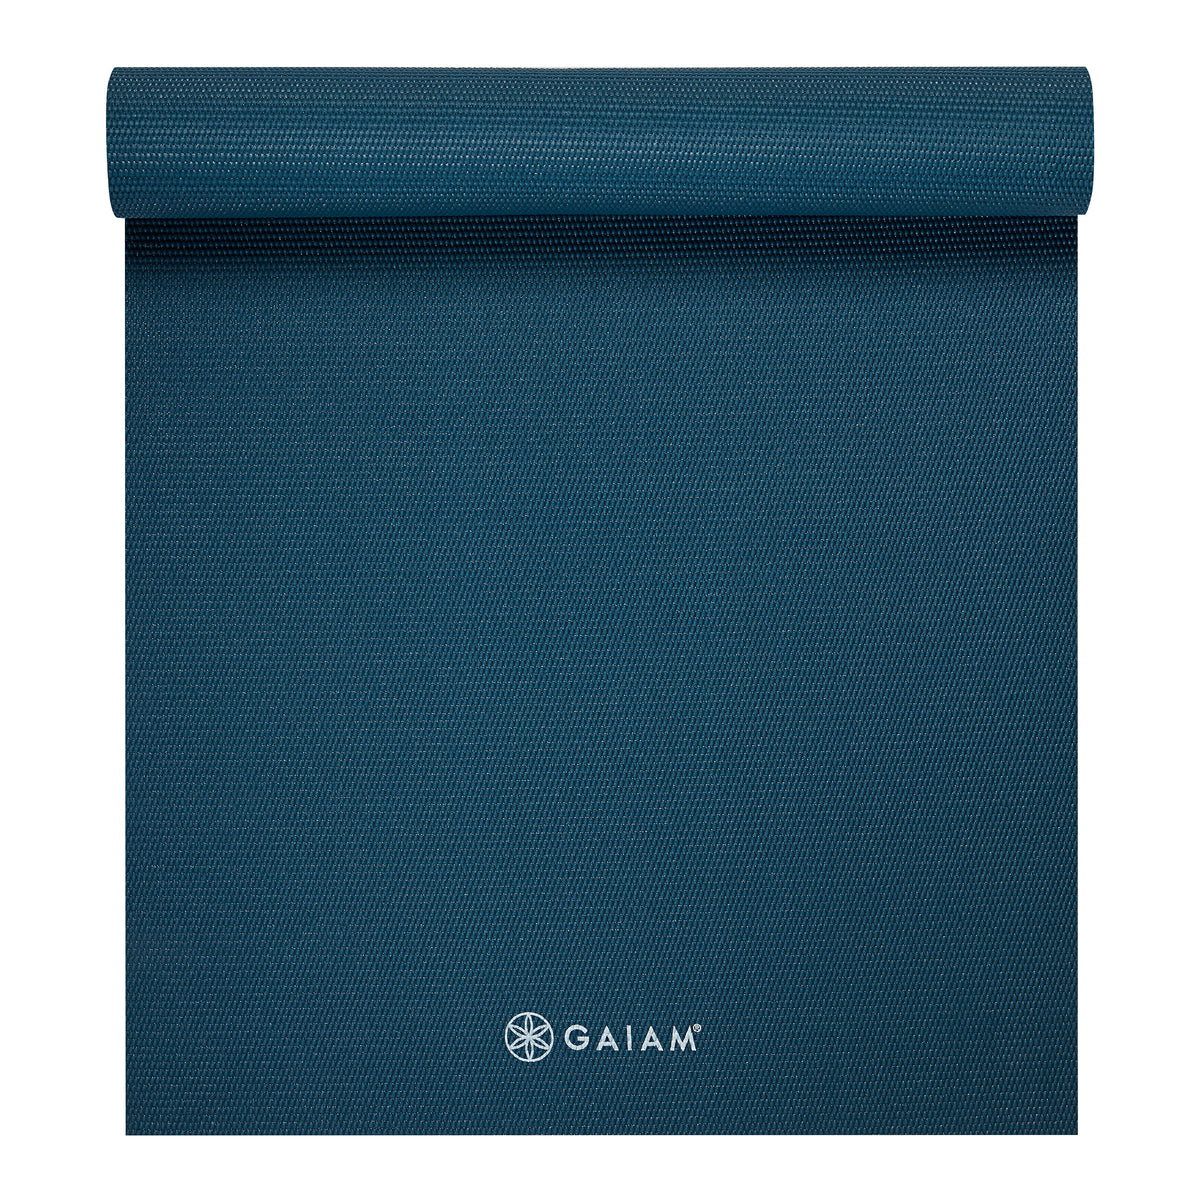 Gaiam Classic Solid Color Yoga Mat (5mm) Marine top rolled